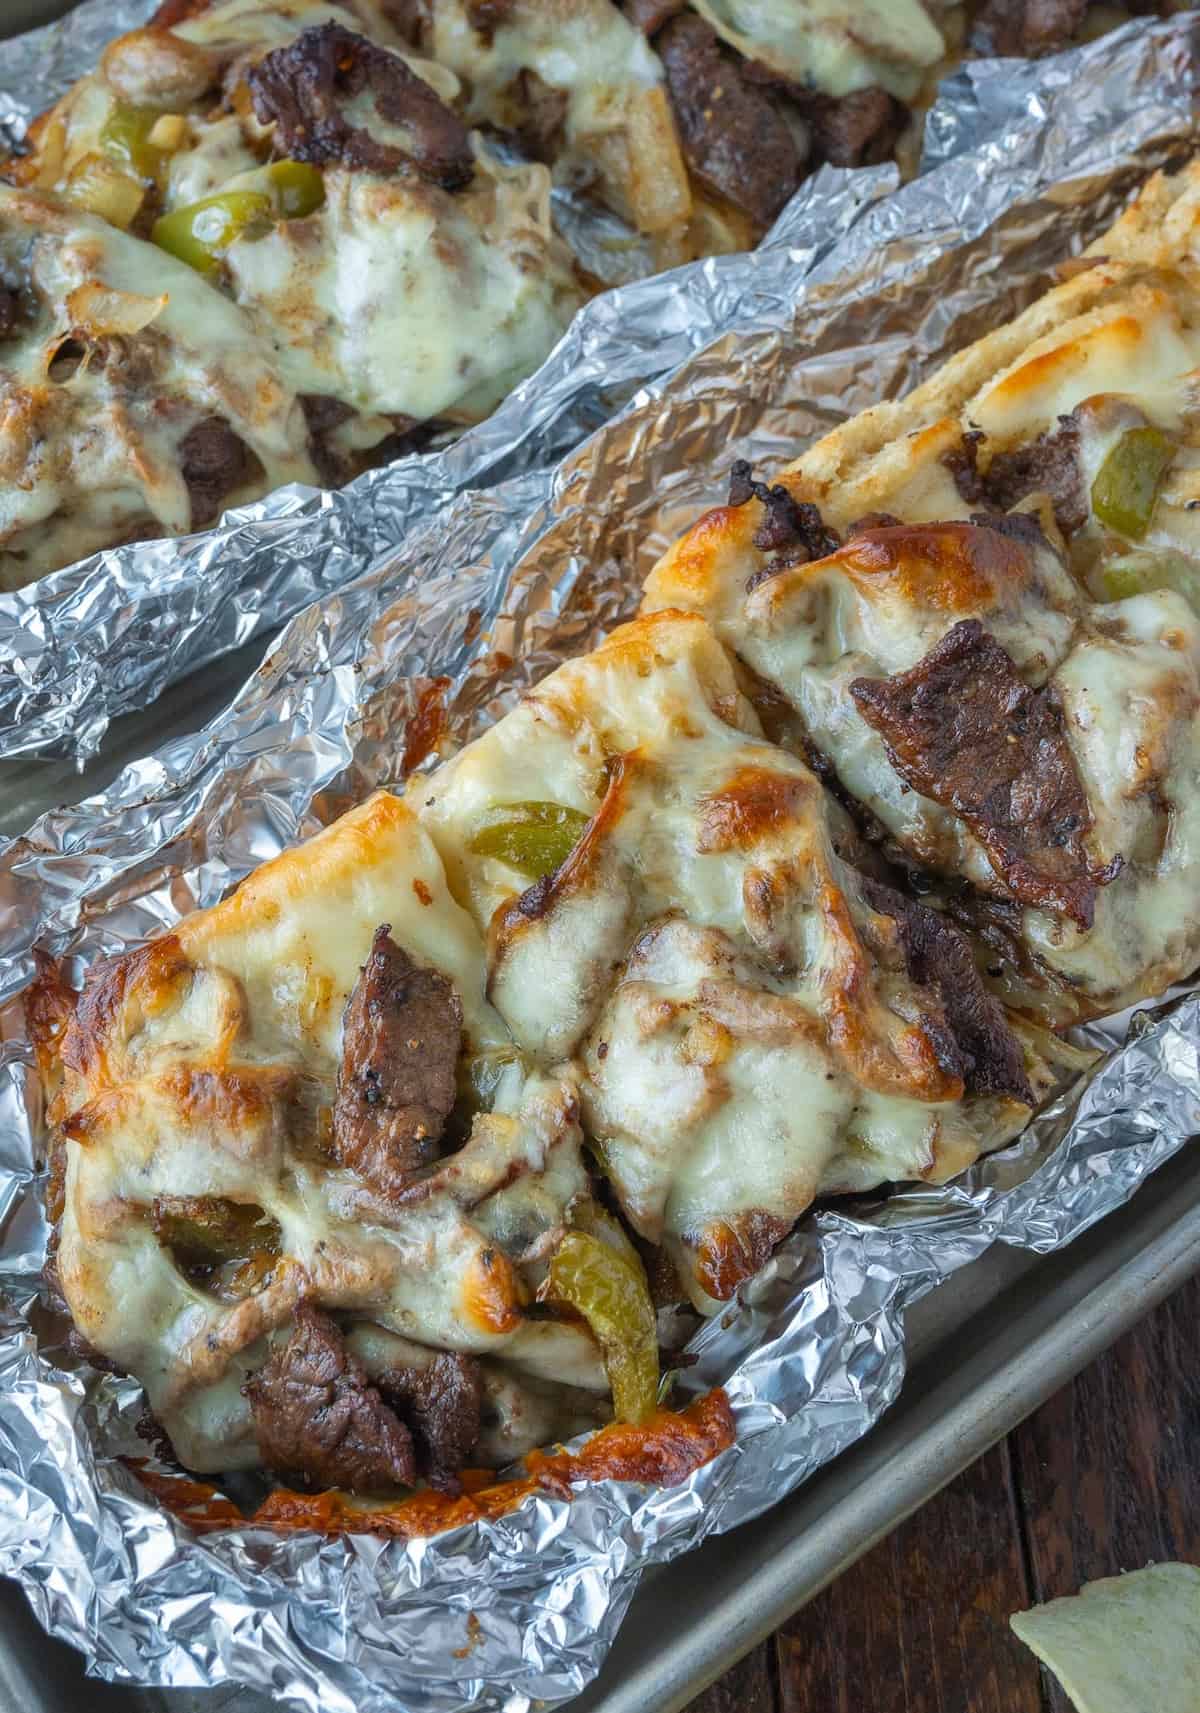 Philly cheesesteak pizza cut into slices.